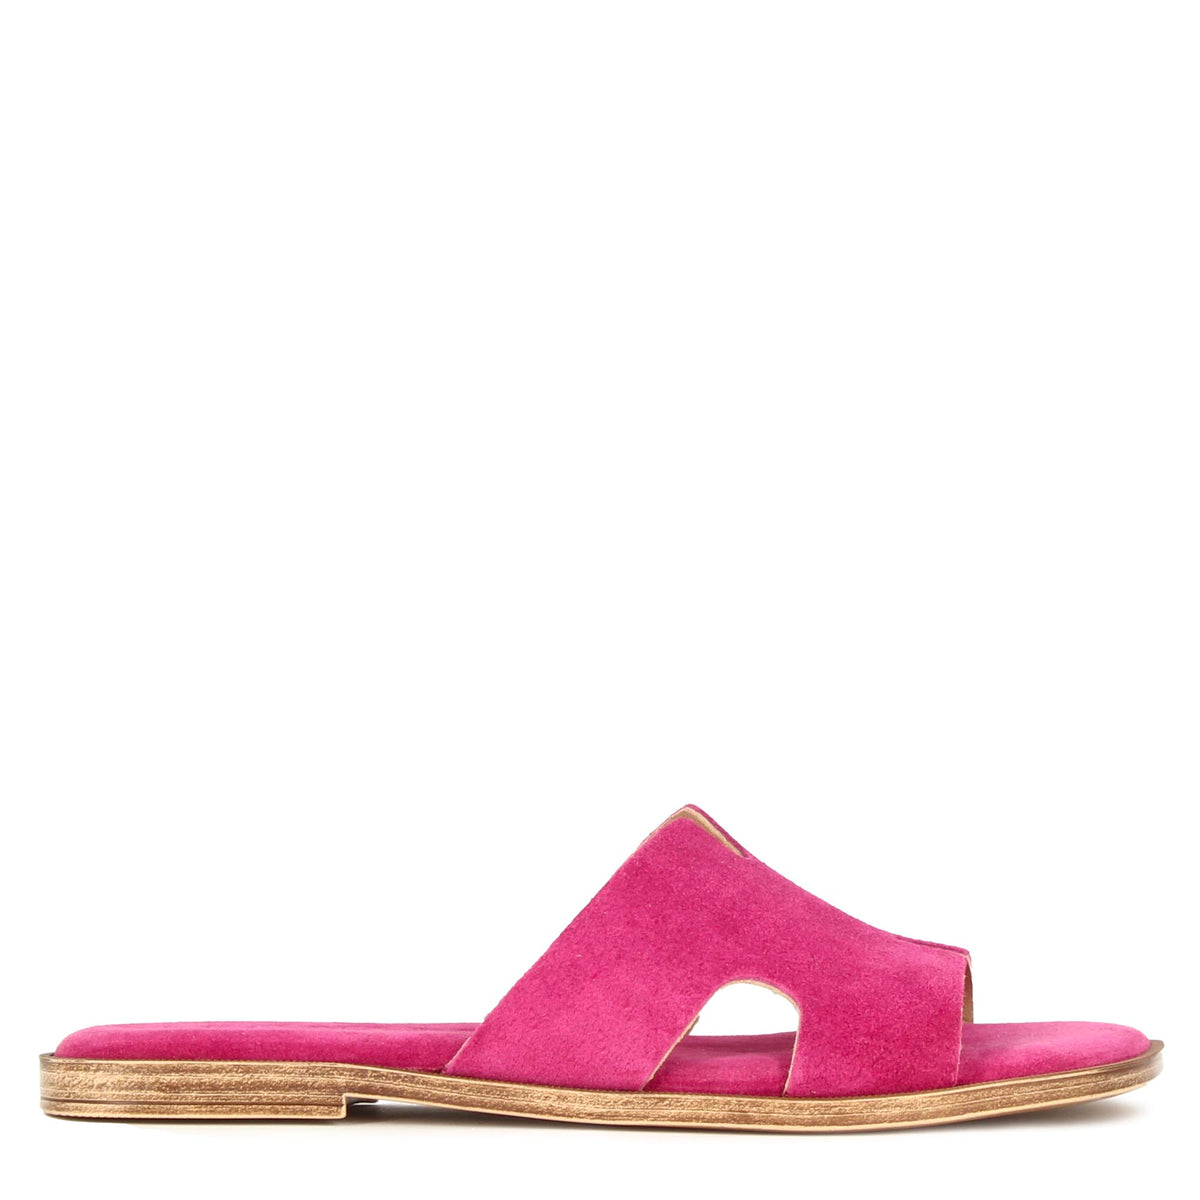 Women's slippers in pink suede leather